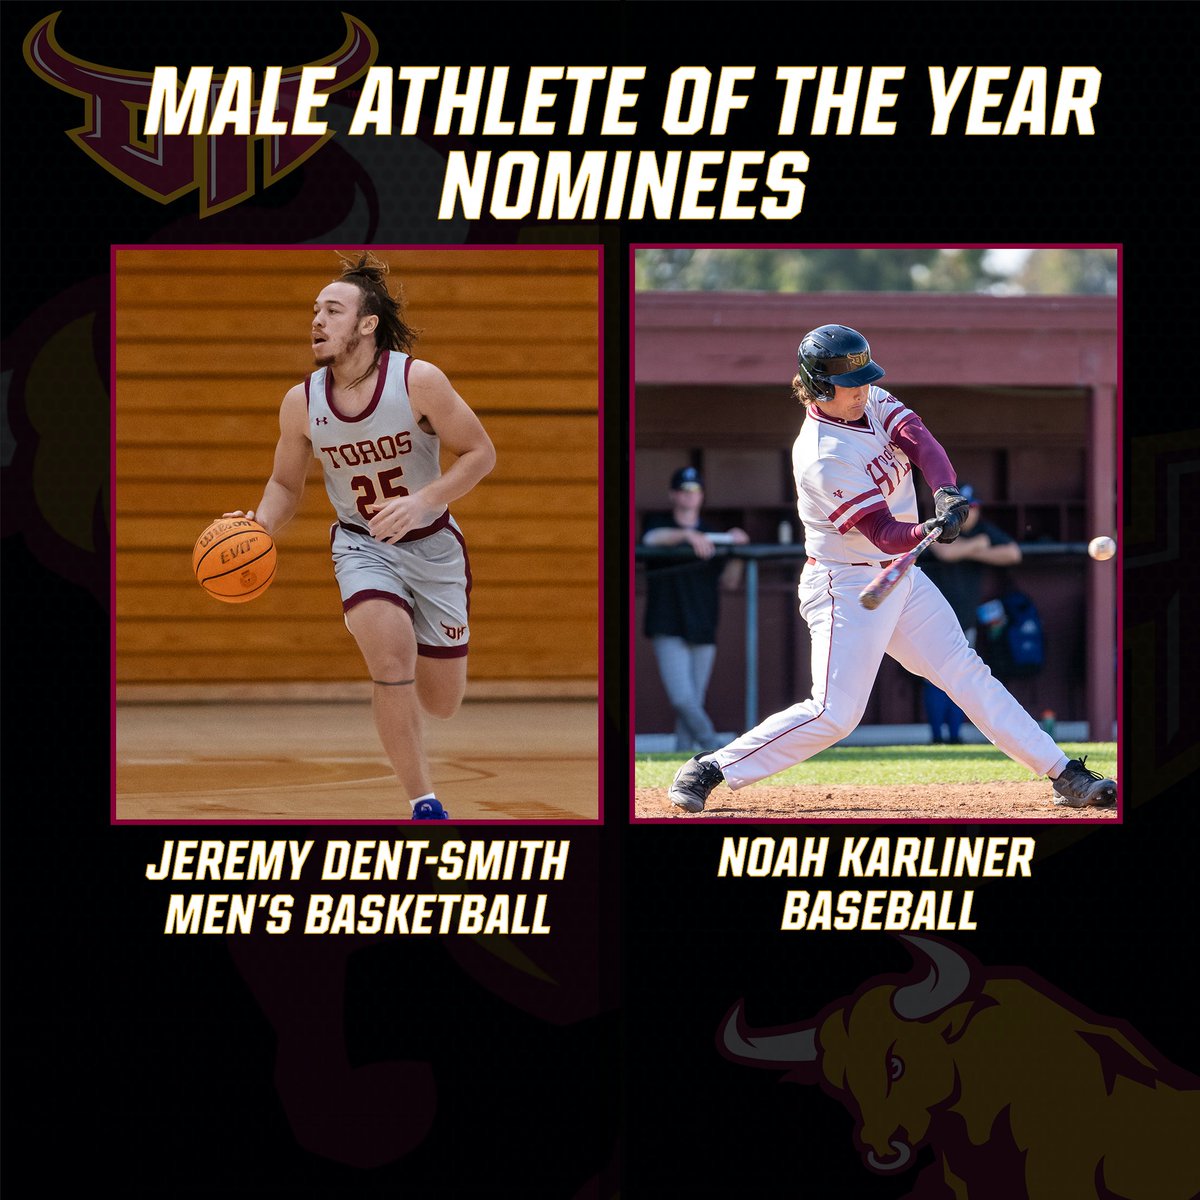 Here is the Toros' nominees for Male Athlete of the Year! @CSUDHmbb's Jeremy Dent-Smith and @CSUDHbaseball's Noah Karliner!